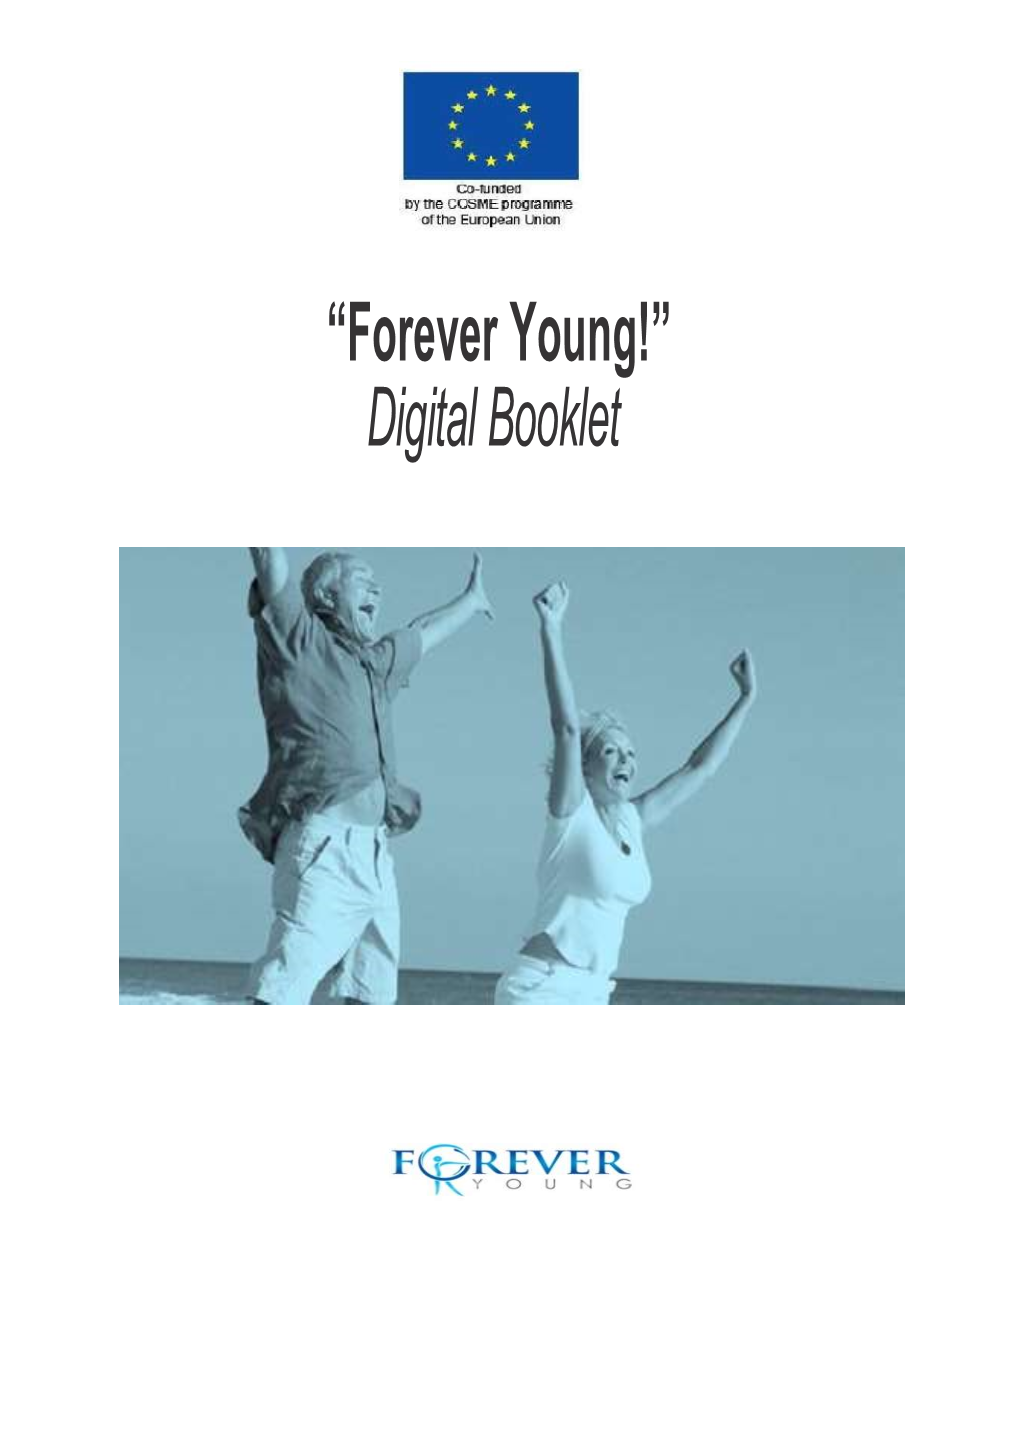 “Forever Young!” Digital Booklet